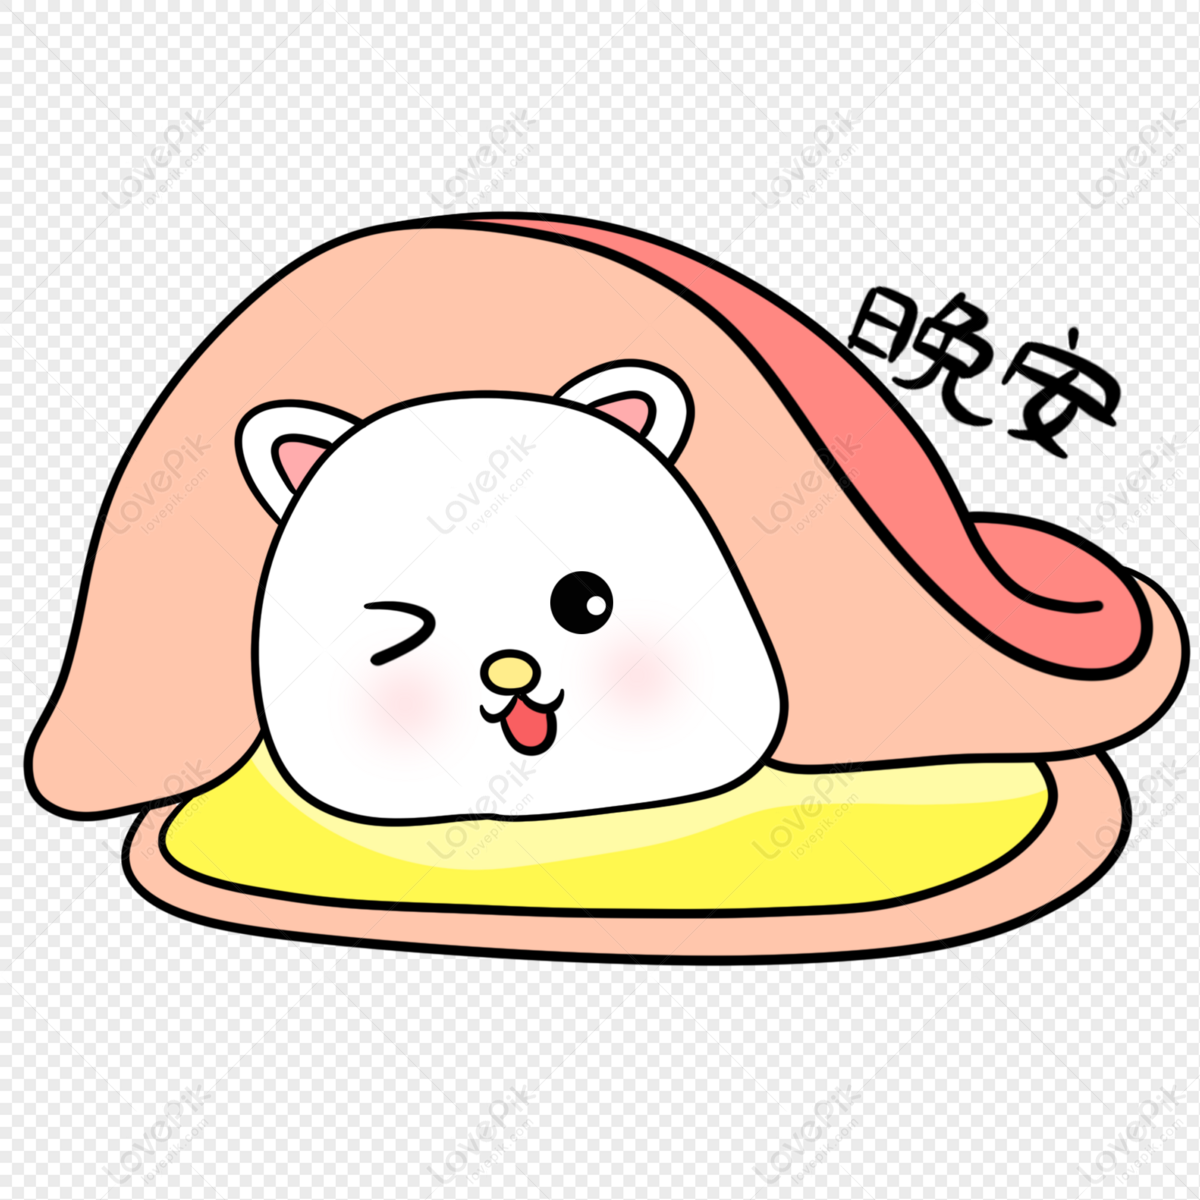 Good Night Cat Expression Pack PNG Hd Transparent Image And ...